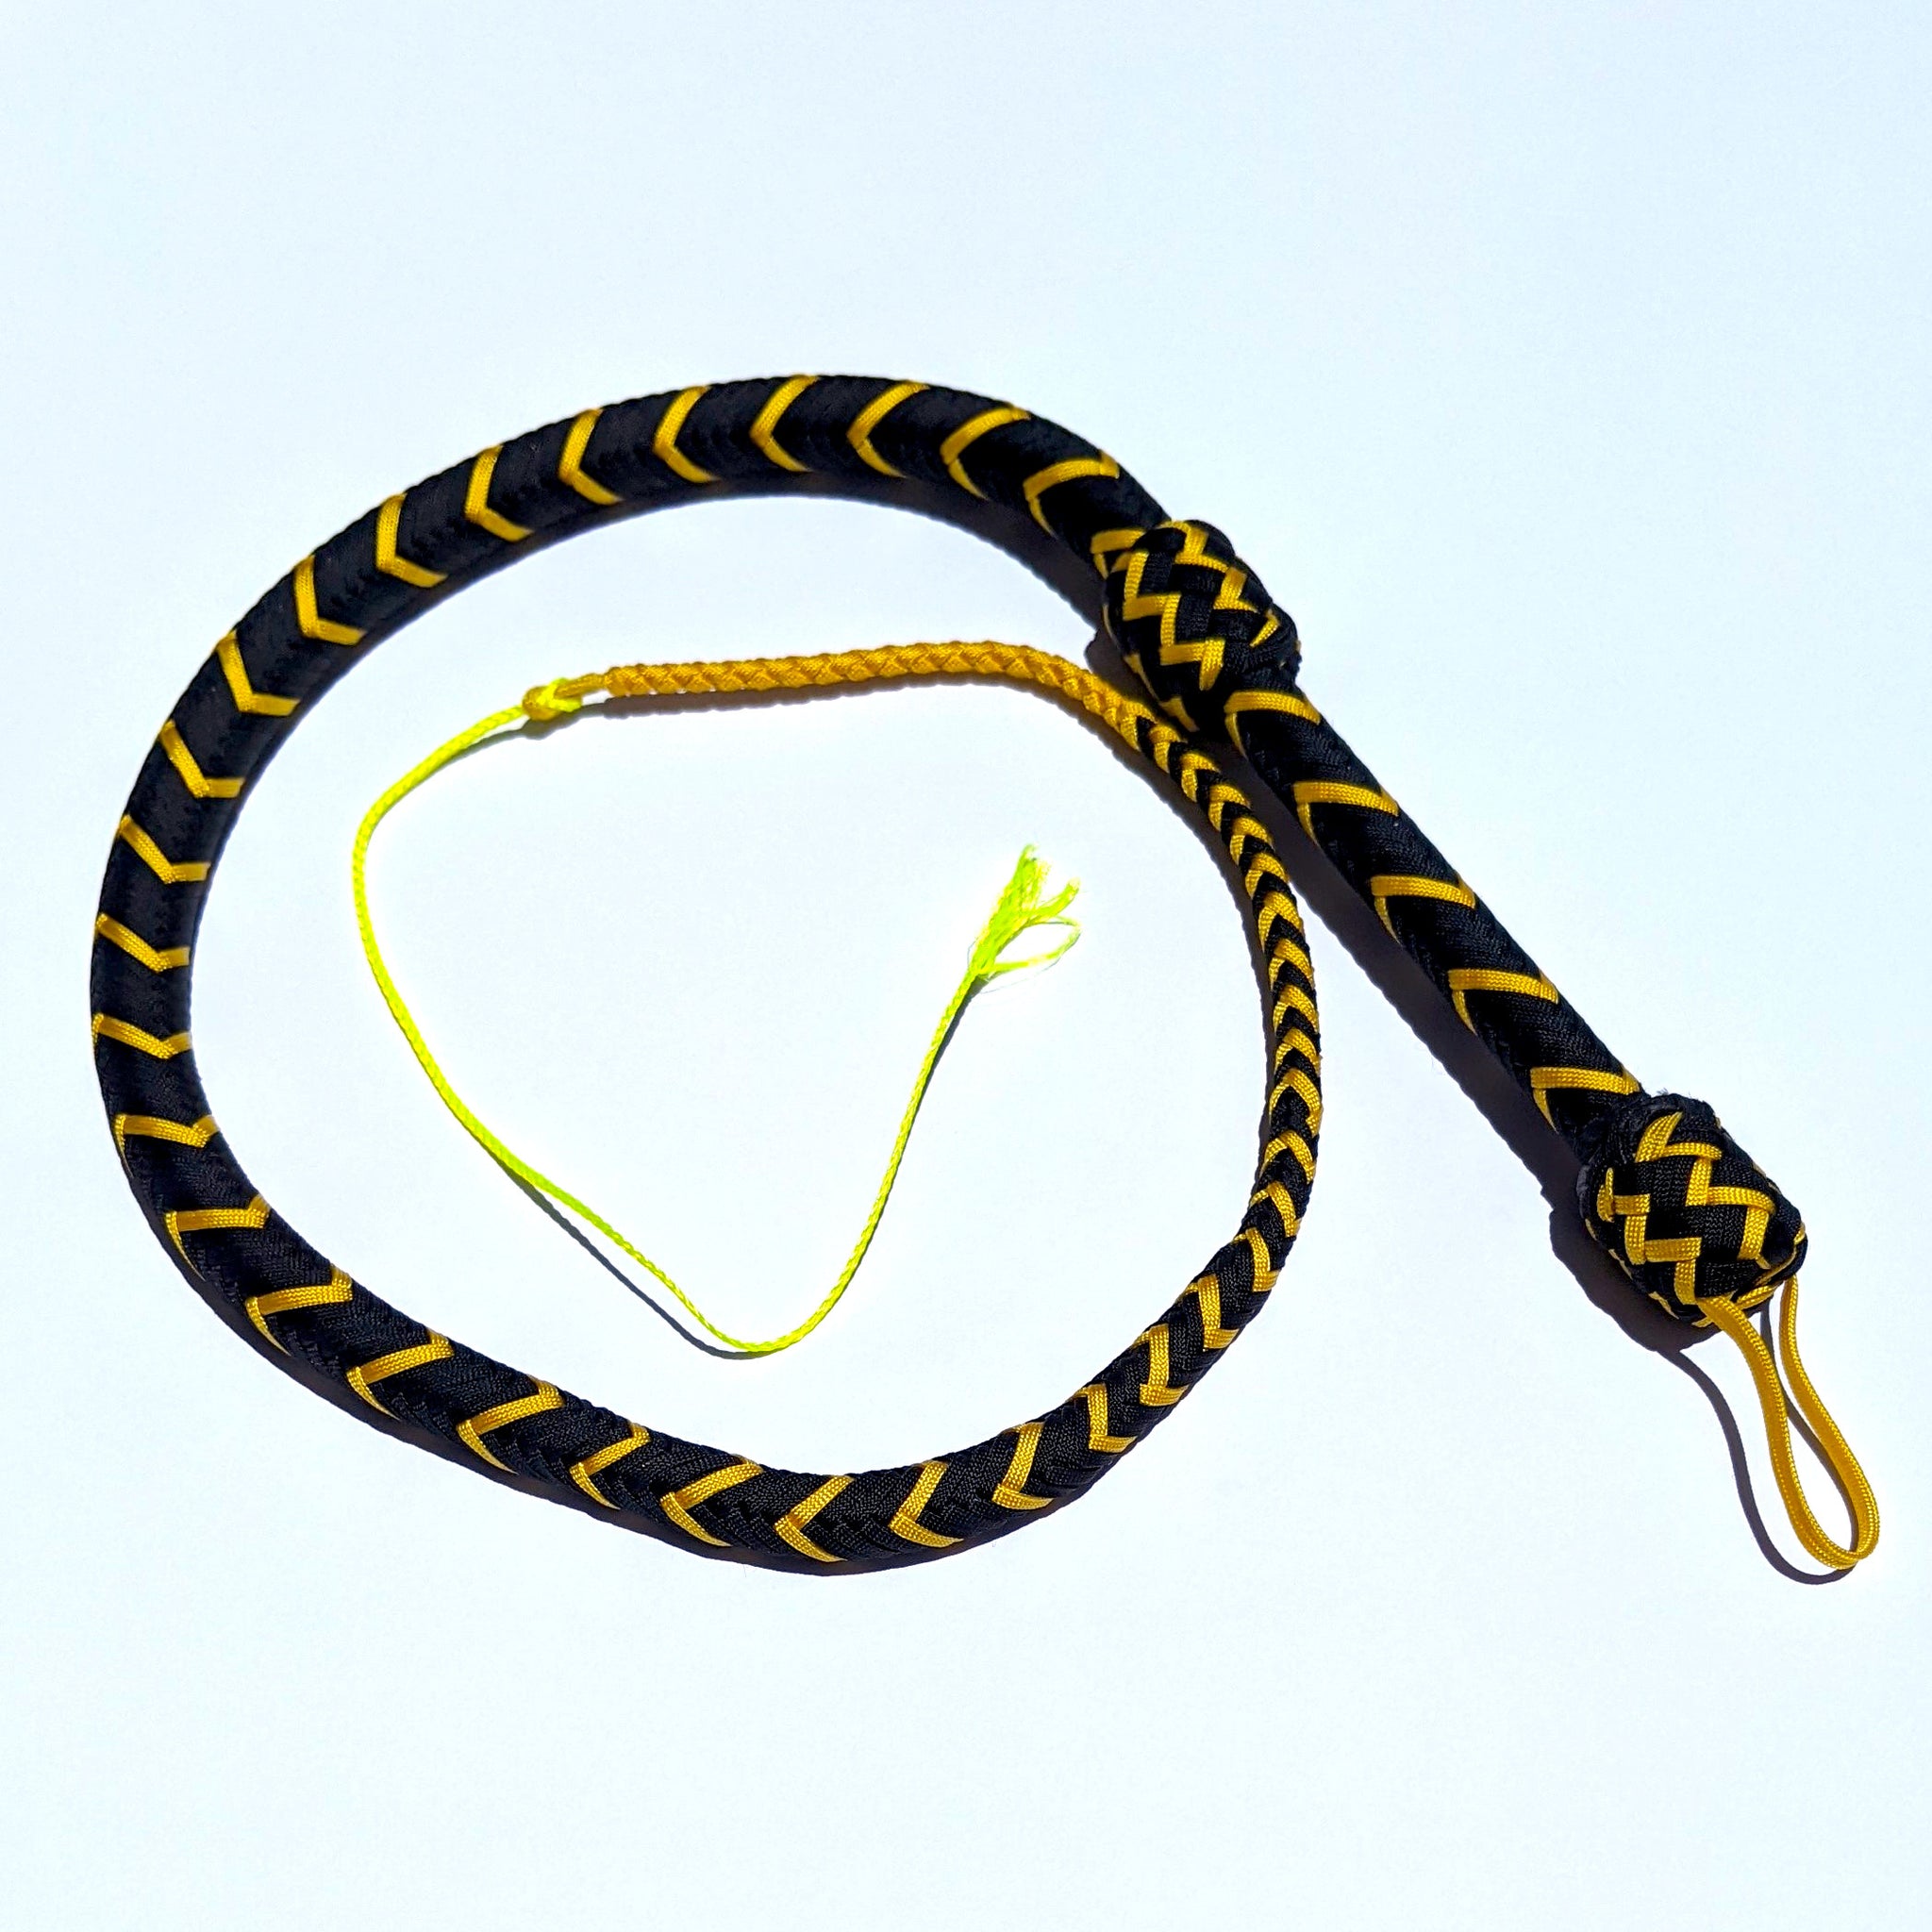 Bullwhip - The Ringed Viper in whipmaker cord